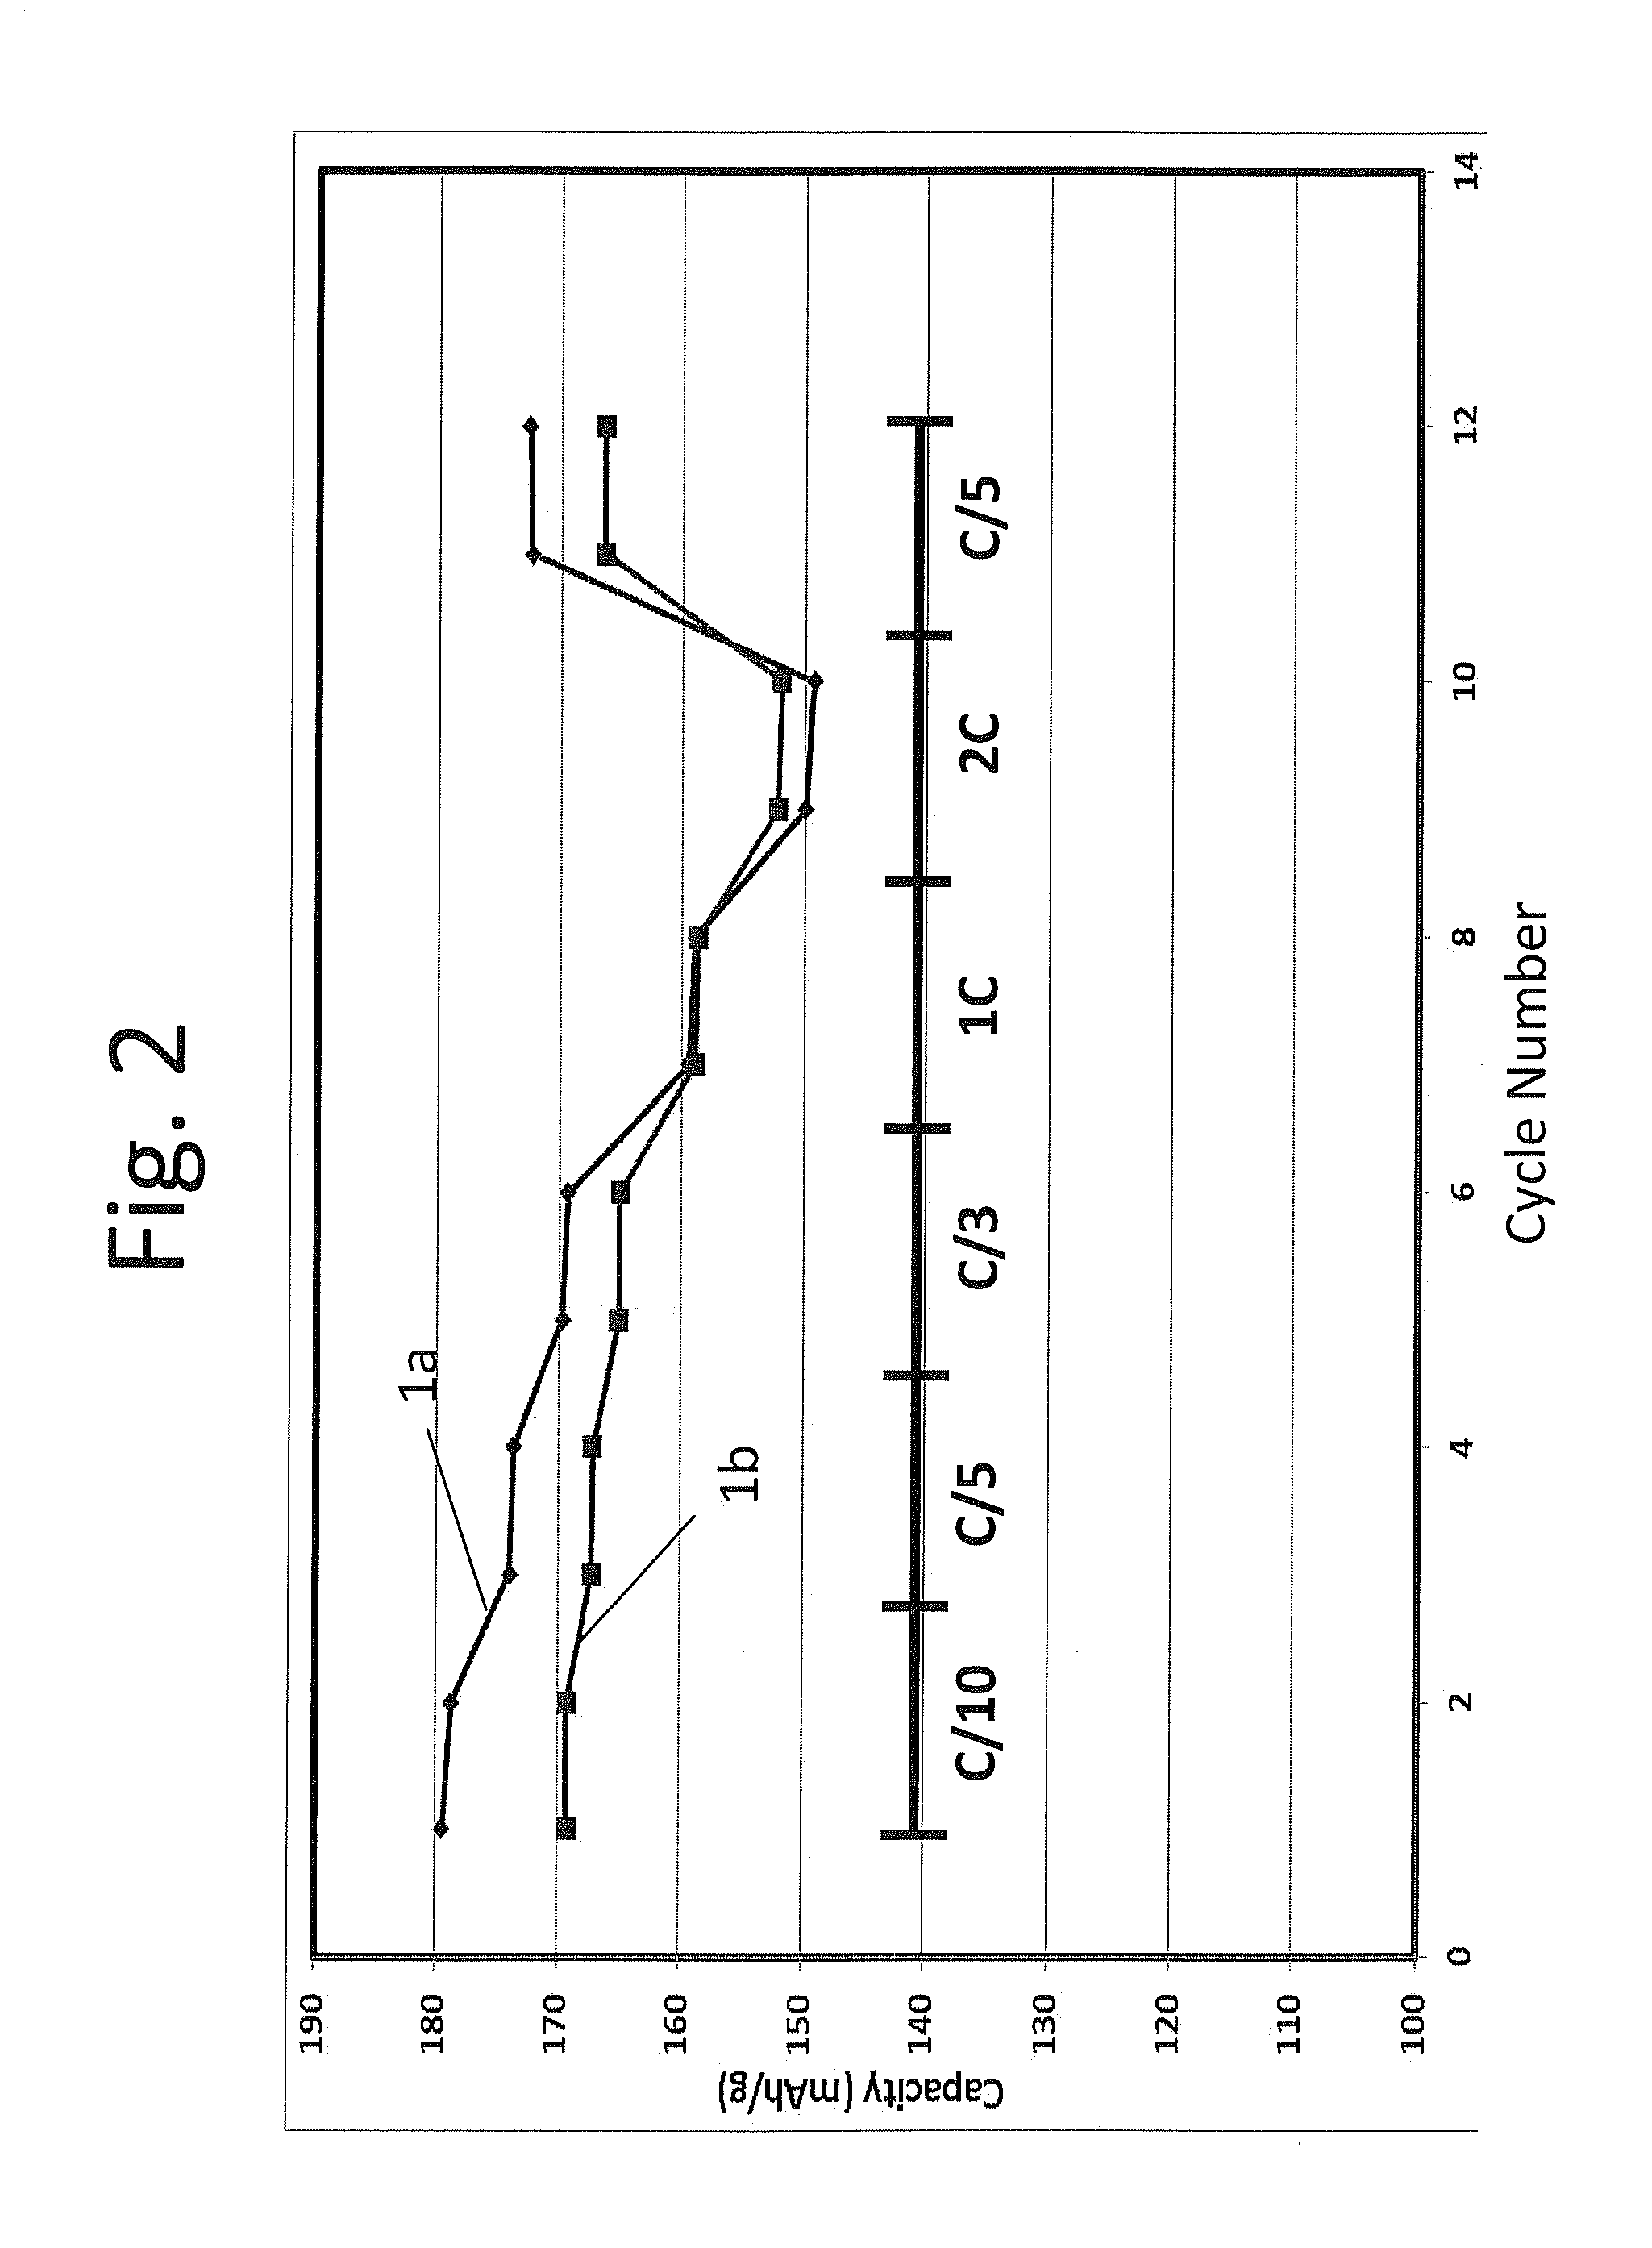 High capacity lithium ion battery formation protocol and corresponding batteries